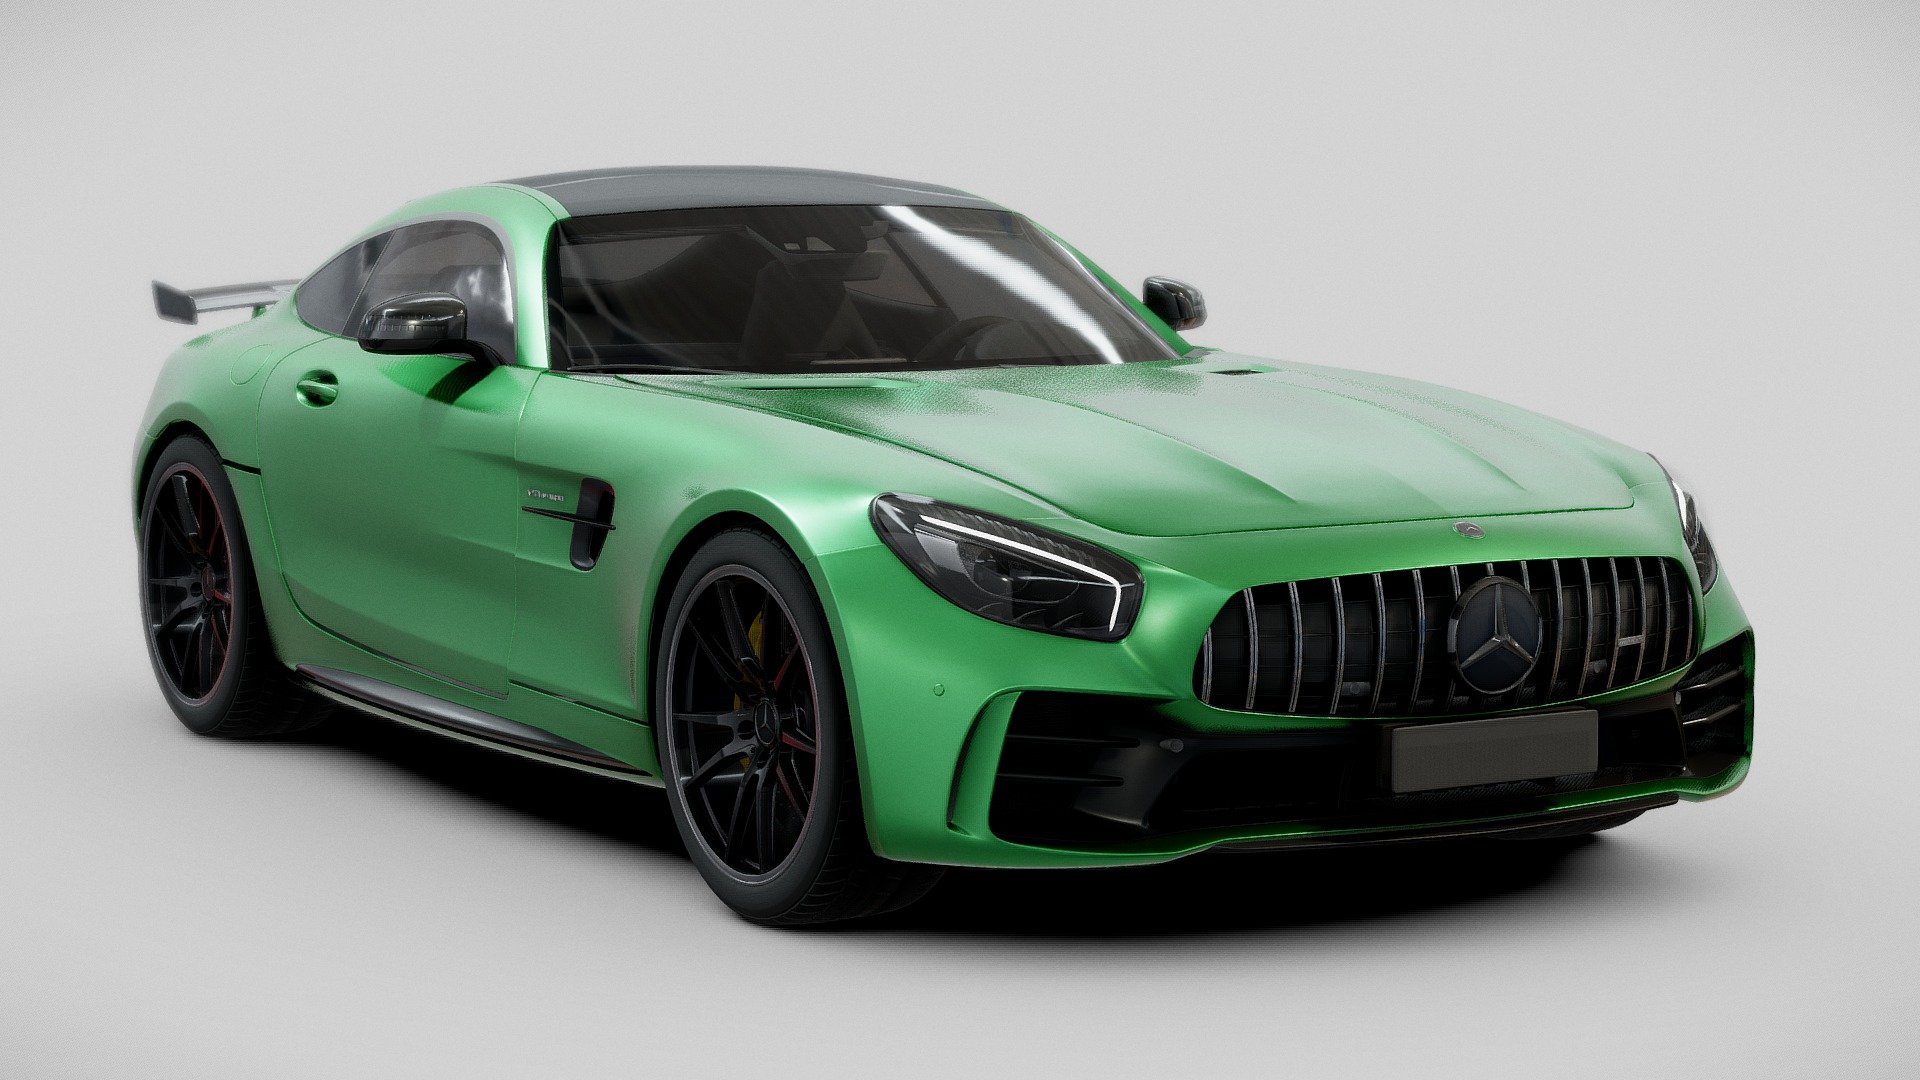 3d car model of Mercedes AMG GT R 2017

.

HIGH END / high poly / fully editable / rigable / interiour

by getting this model you have full control on meshes and materials

you can even subdivide all parts for having better looking details.

.

listen listen listen!!!!

**next week im gonna randomly give away this car to one of u lucky friends who like, follow and tell me me which car should i upload next week 

**don't forget to like and share your thoughts!! 🍻 .

.

you can support me by folowing me on instagram

my ig: ZIRODESIGN - Mercedes AMG GT R 2017 (HIGH-QUALITY) (30%OFF) - Buy Royalty Free 3D model by ZIRODESIGN 3d model